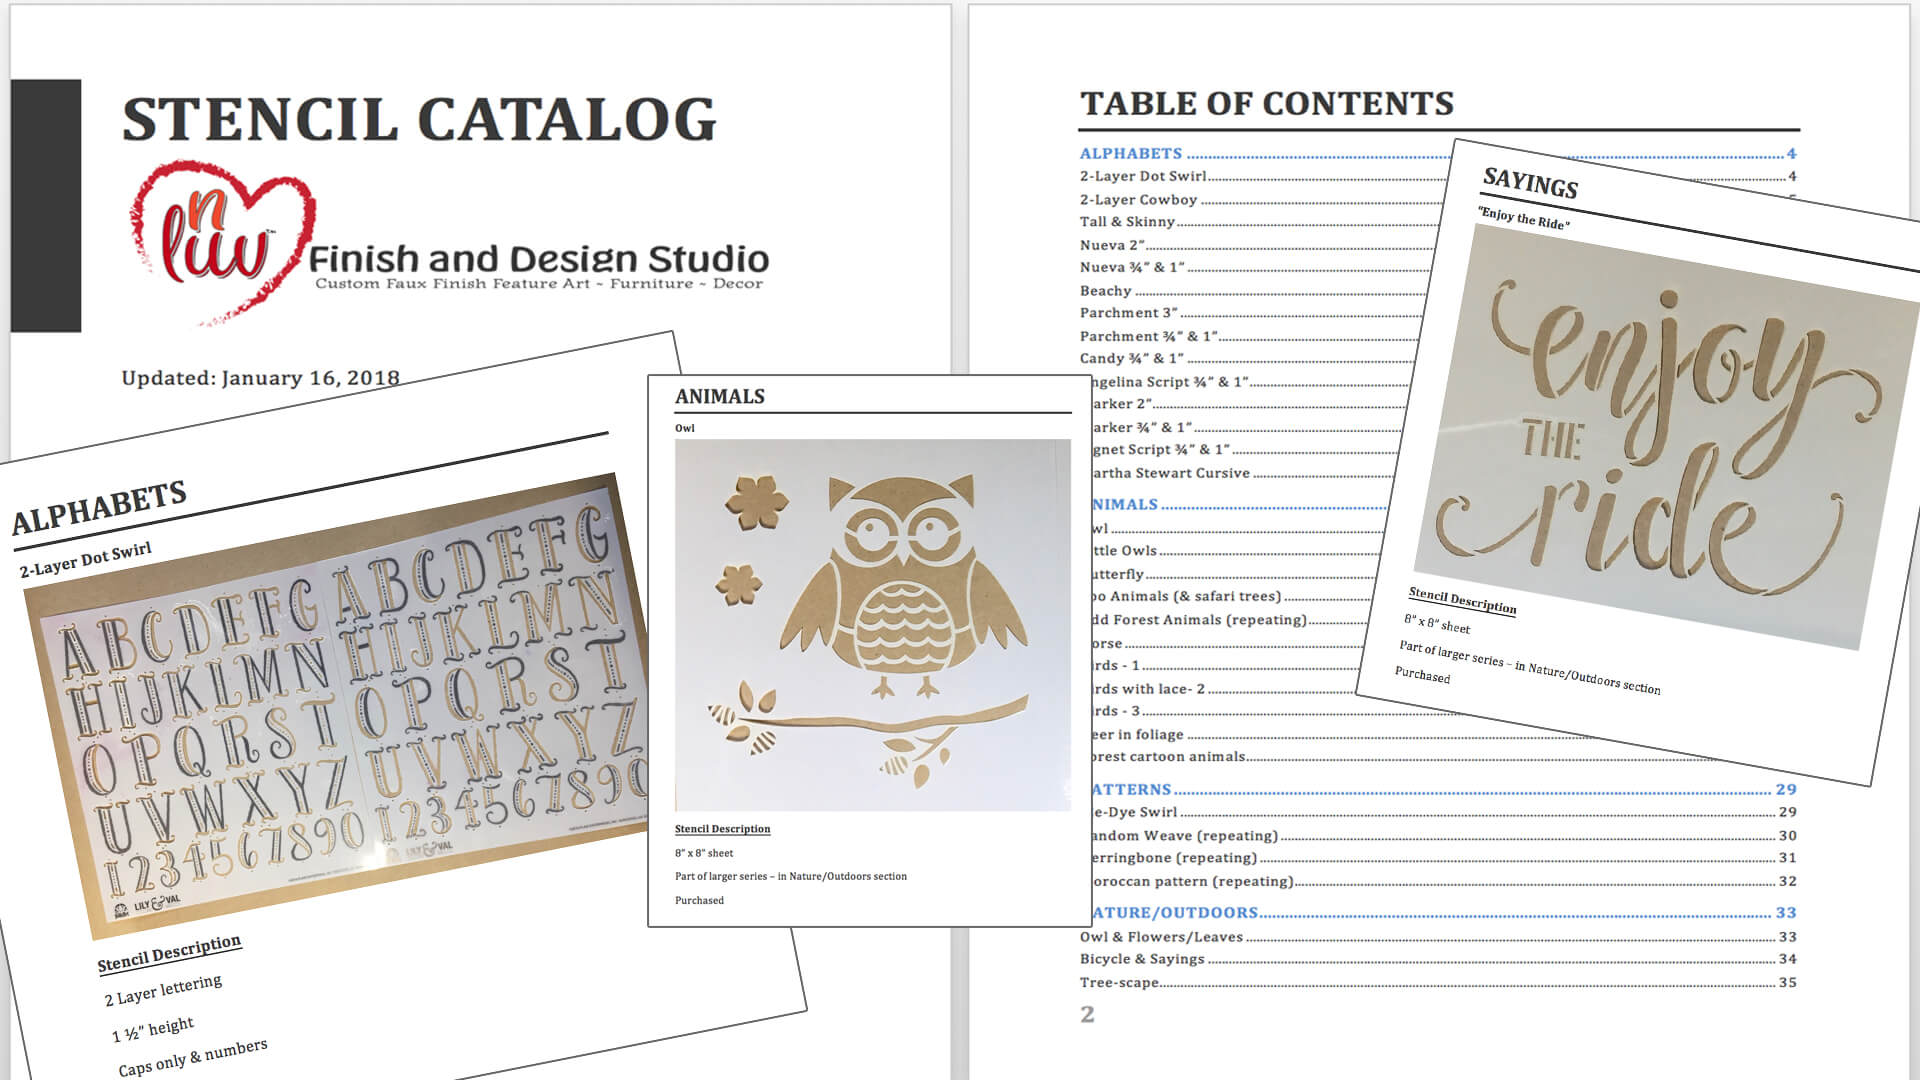 Get Organized – Top 5 Tips to Building a Catalog